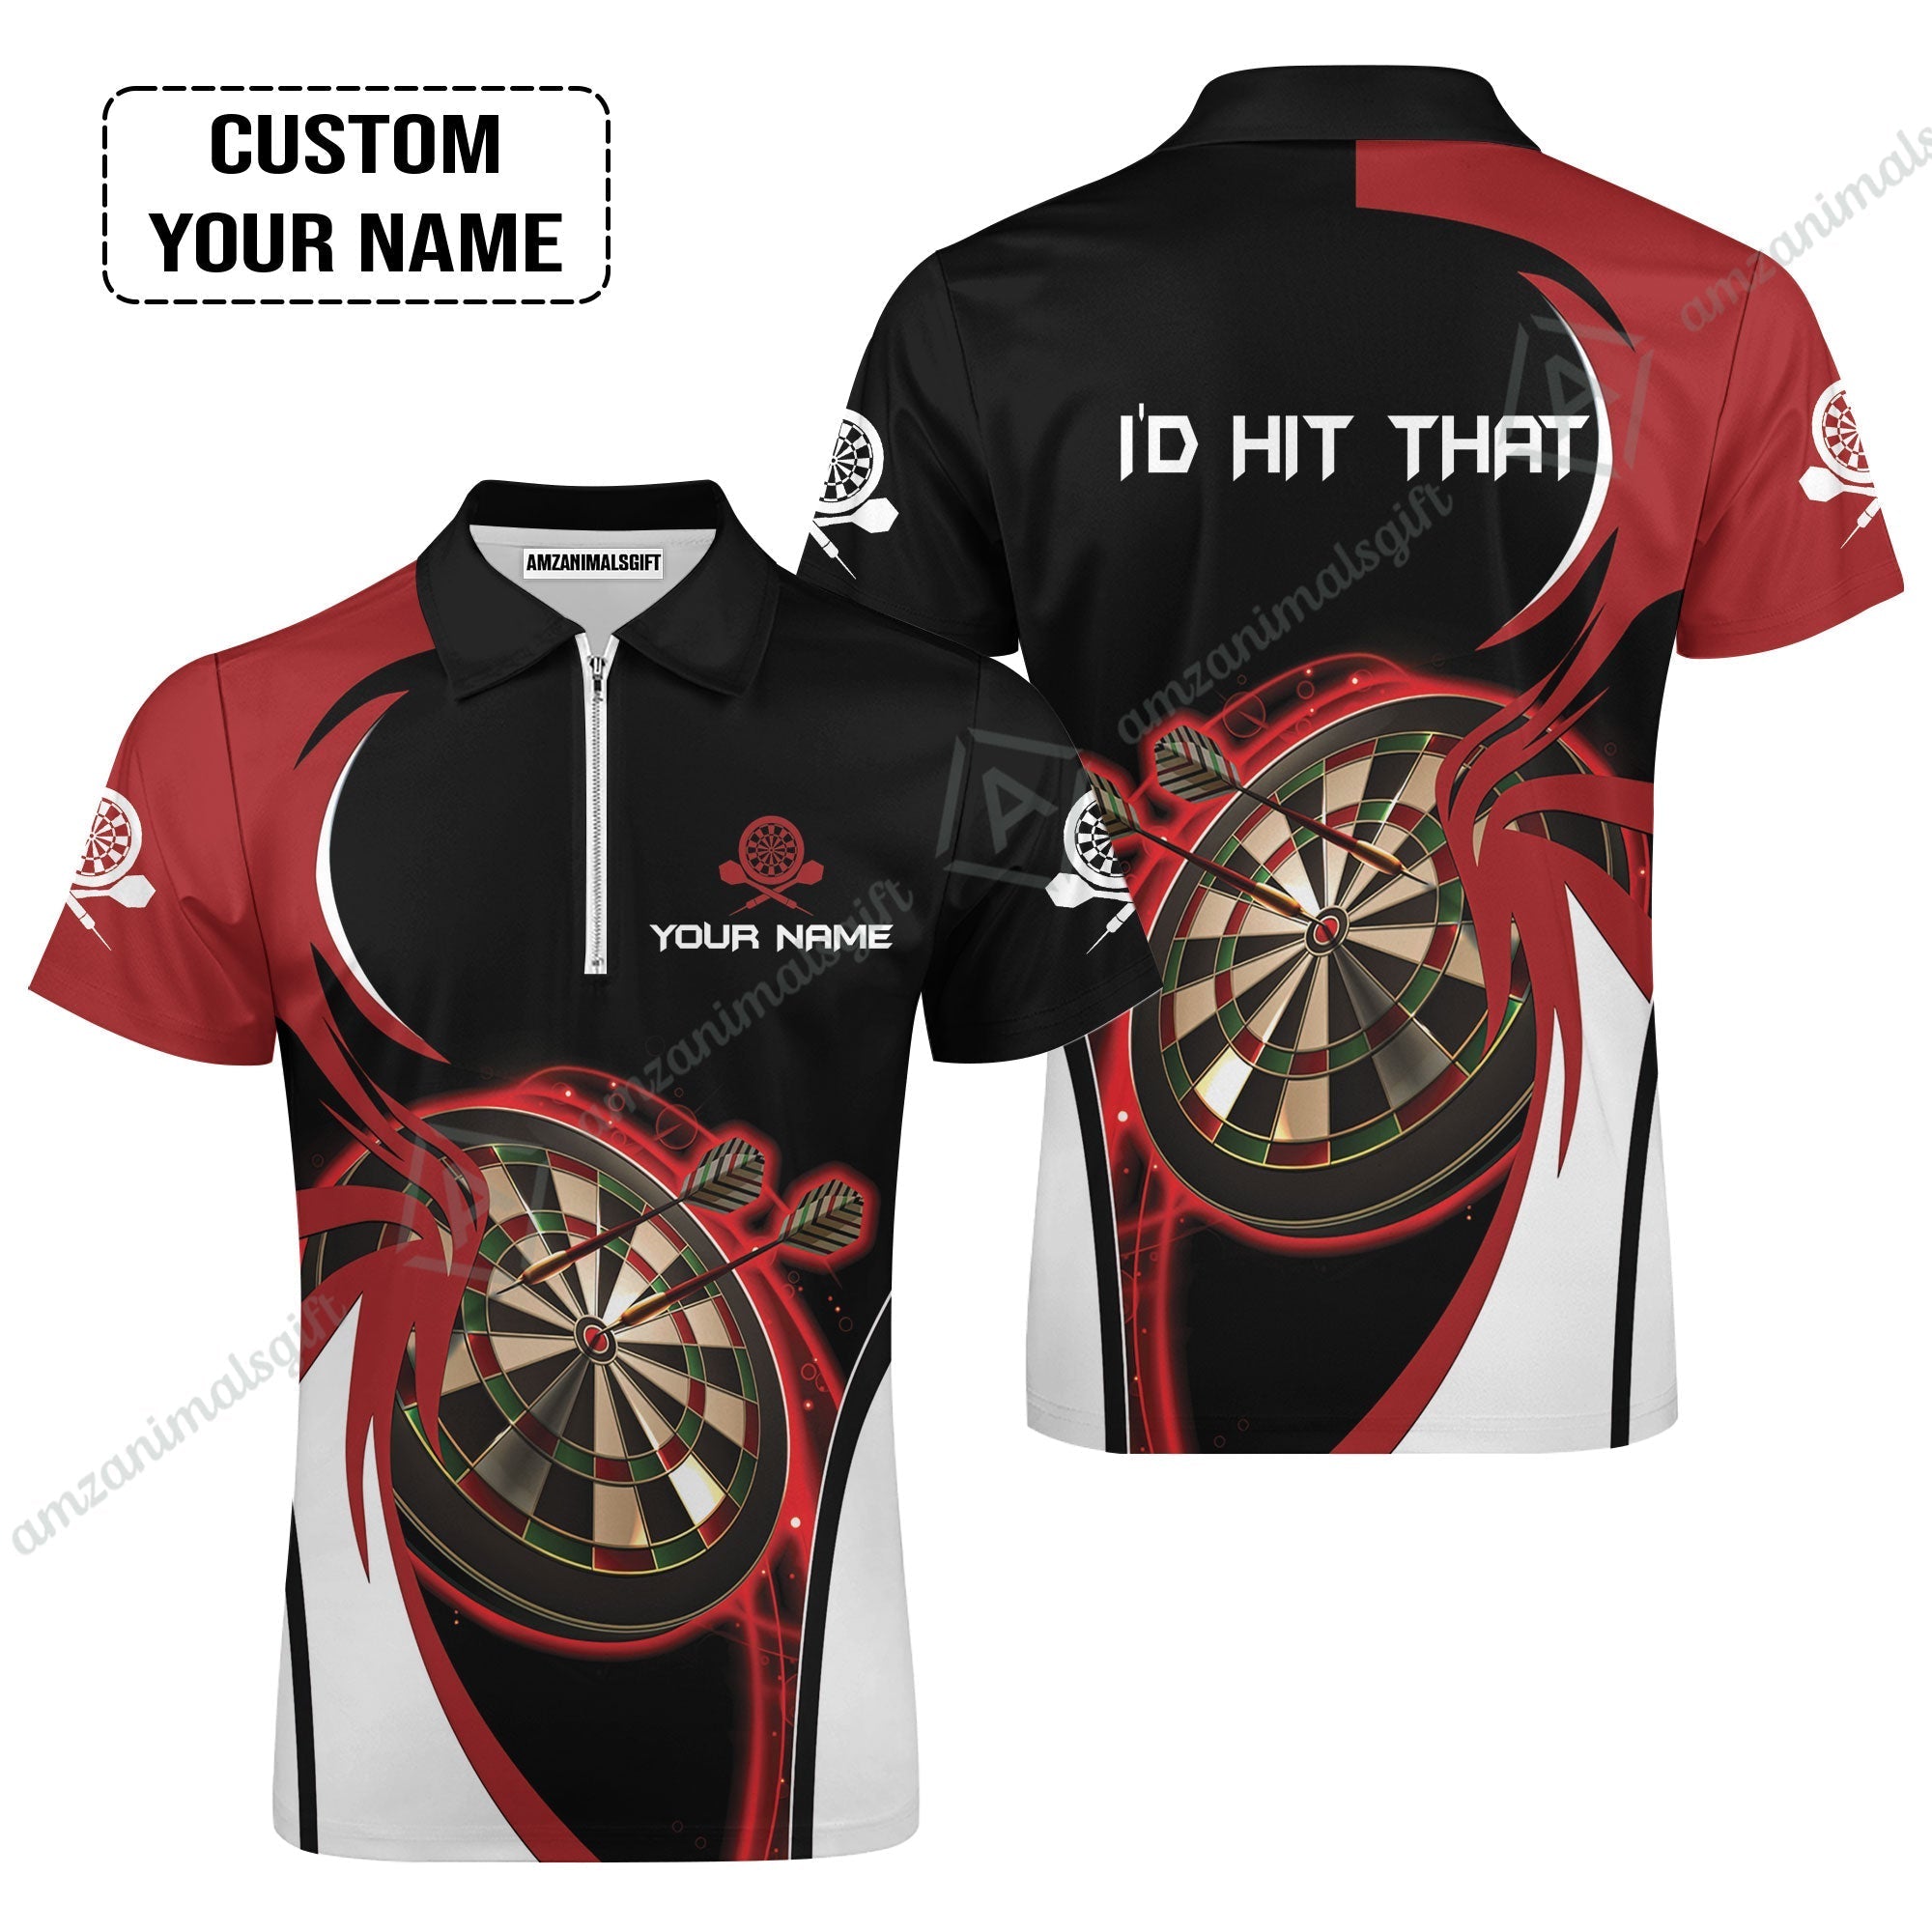 Personalised Darts Zip Polo Shirt, I'D Hit That Darts Red Black Background Custom Name Zip Polo Shirt